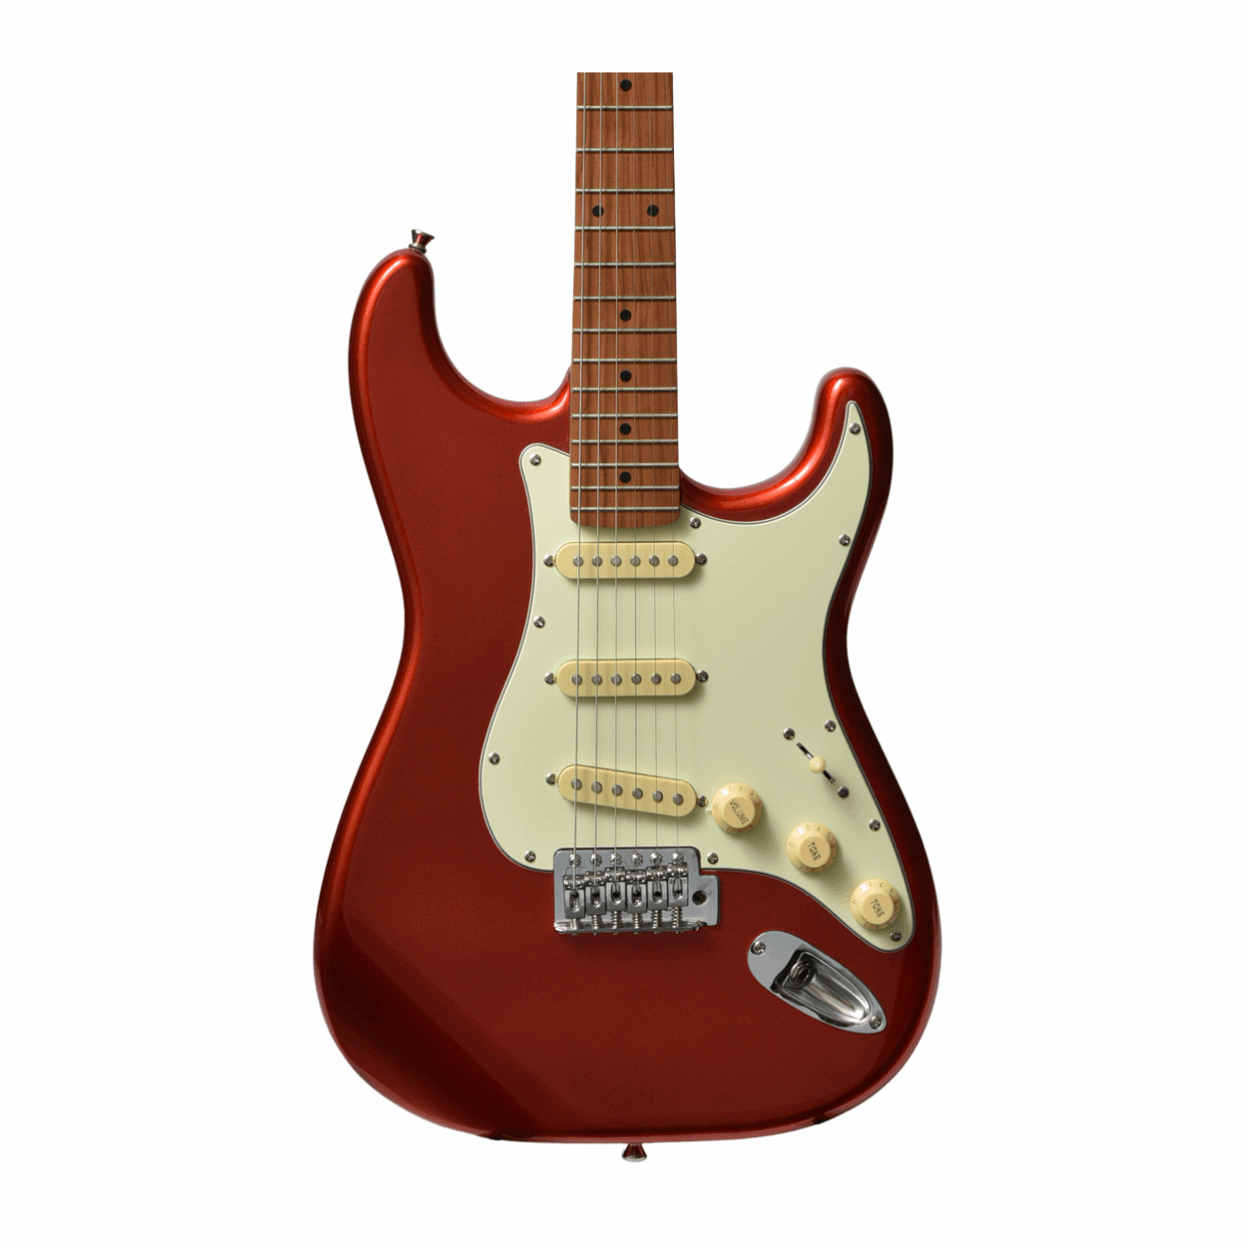 Bacchus Bst-1-rsm/m-car Universe Series Roasted Maple Electric Guitar, Candy Apple Red With Bag